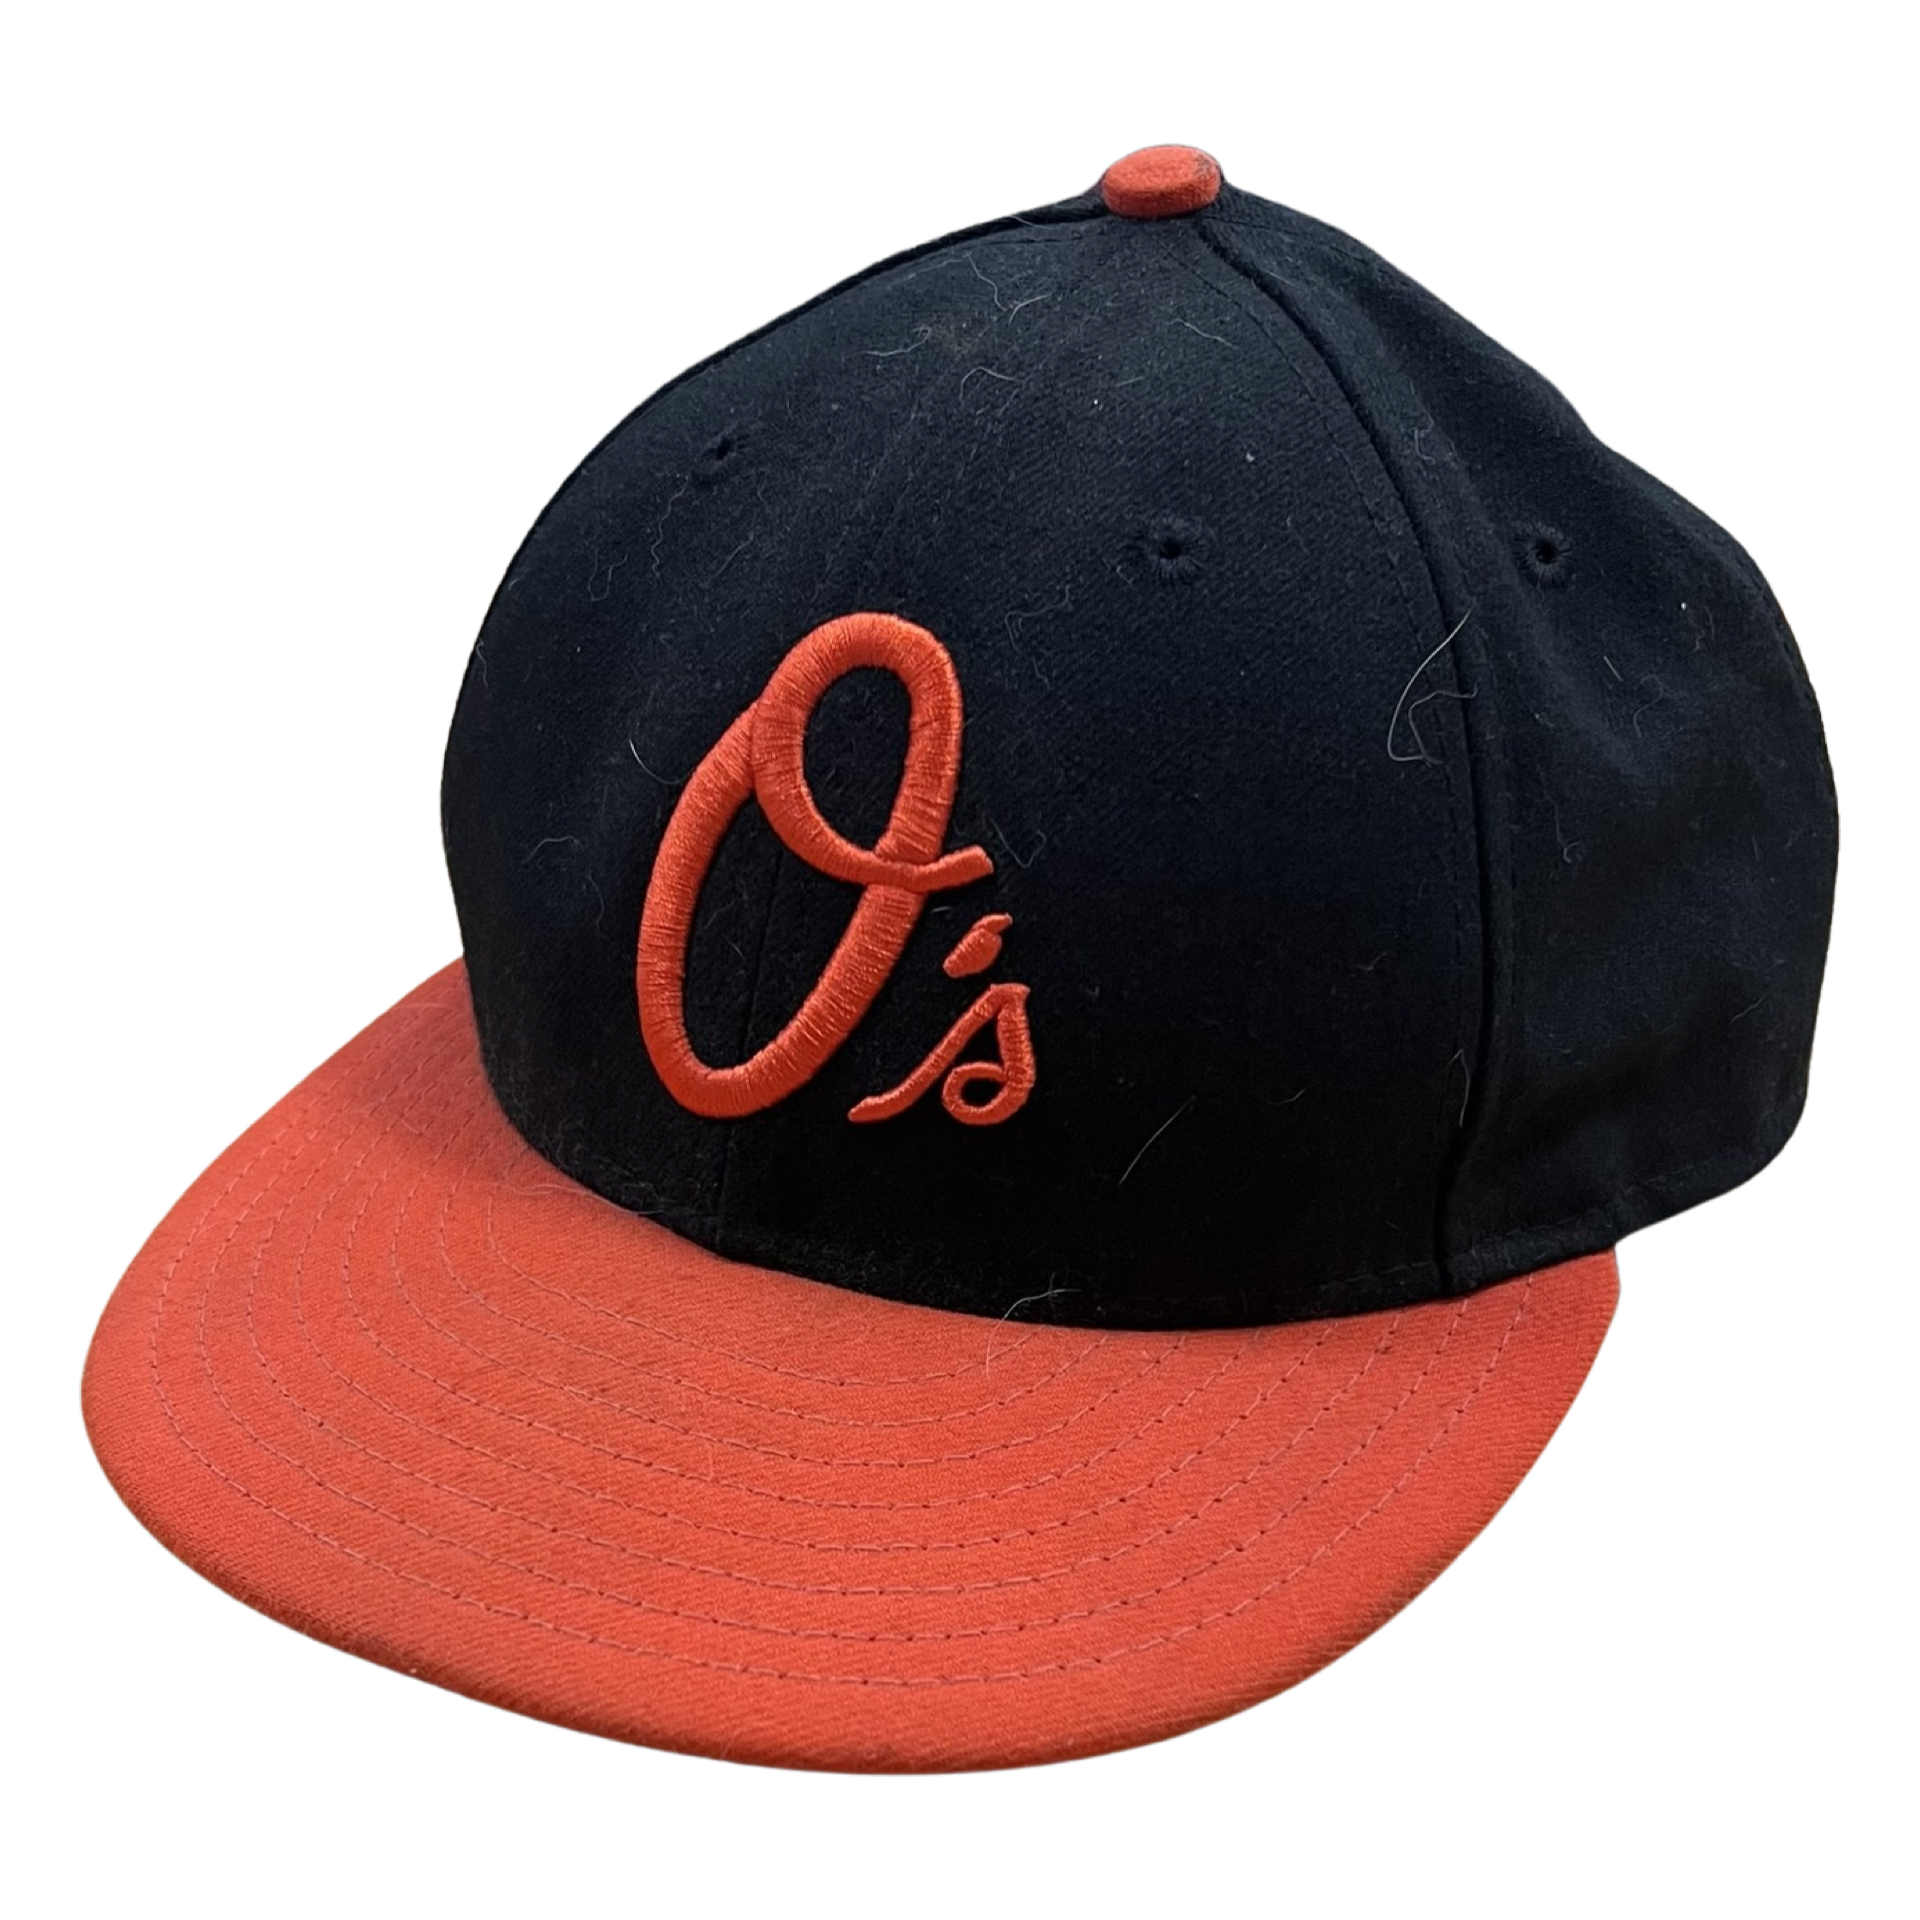 New Era Baltimore Orioles Fitted Low Profile Hat Size 7 1/8 – Feels So Good